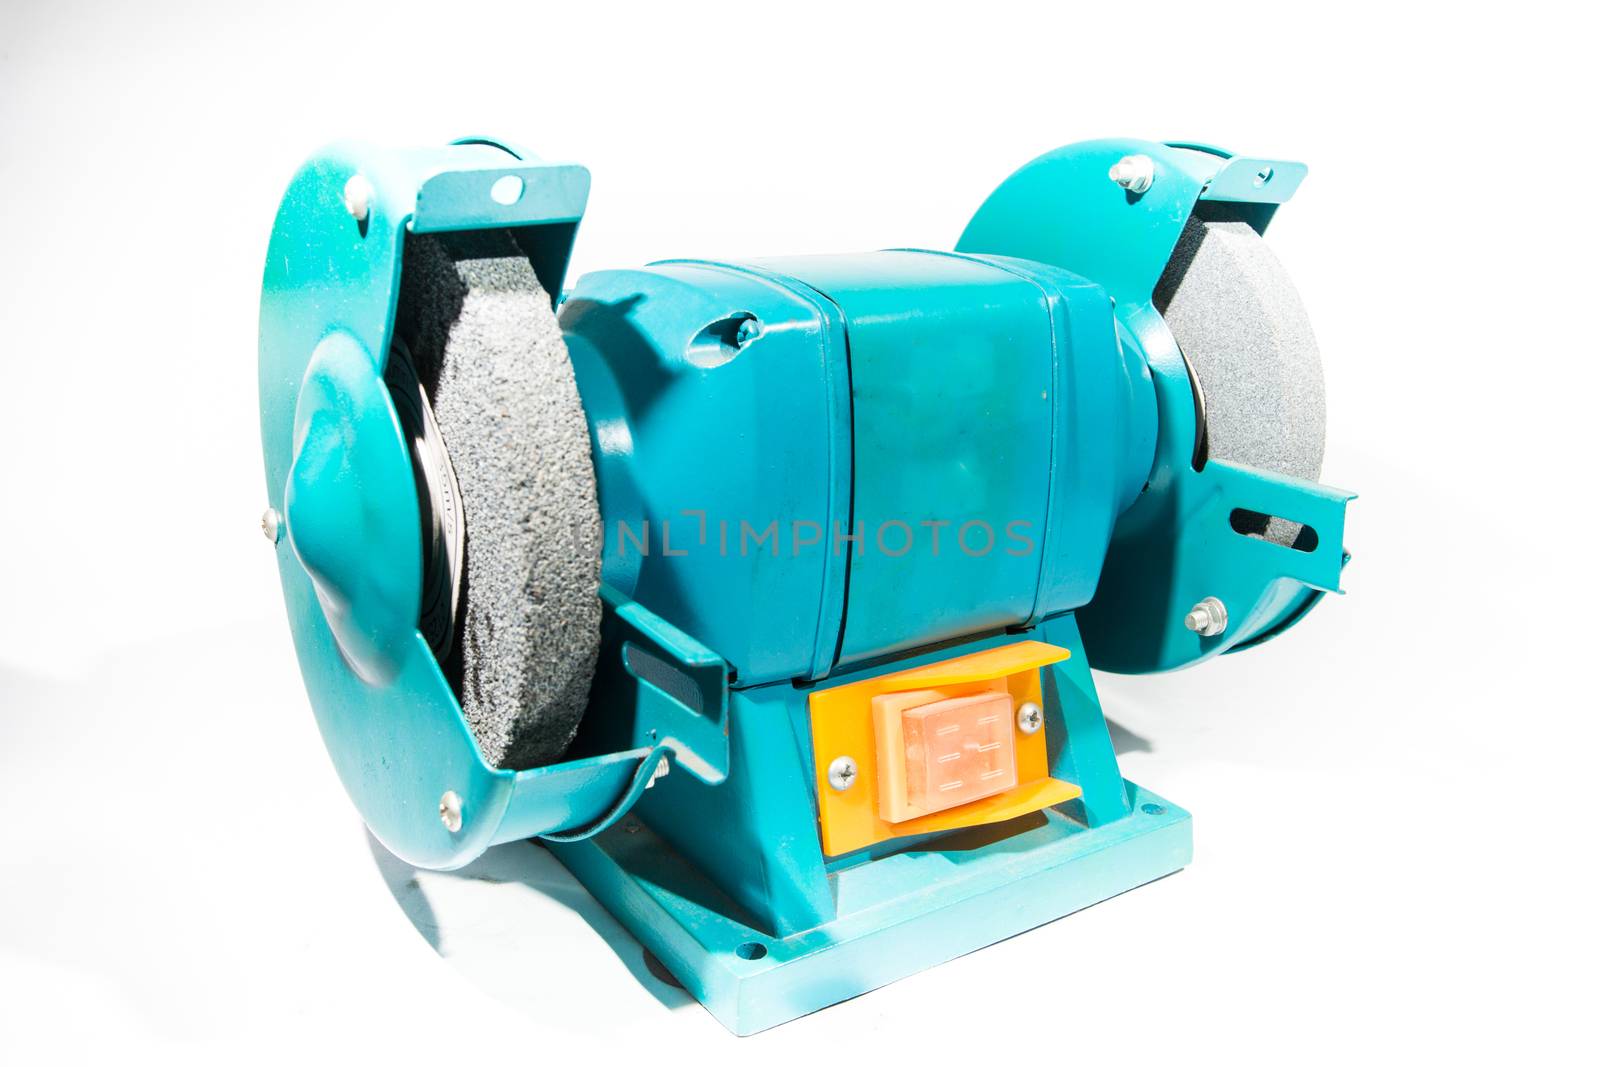 Electric grinder on white background